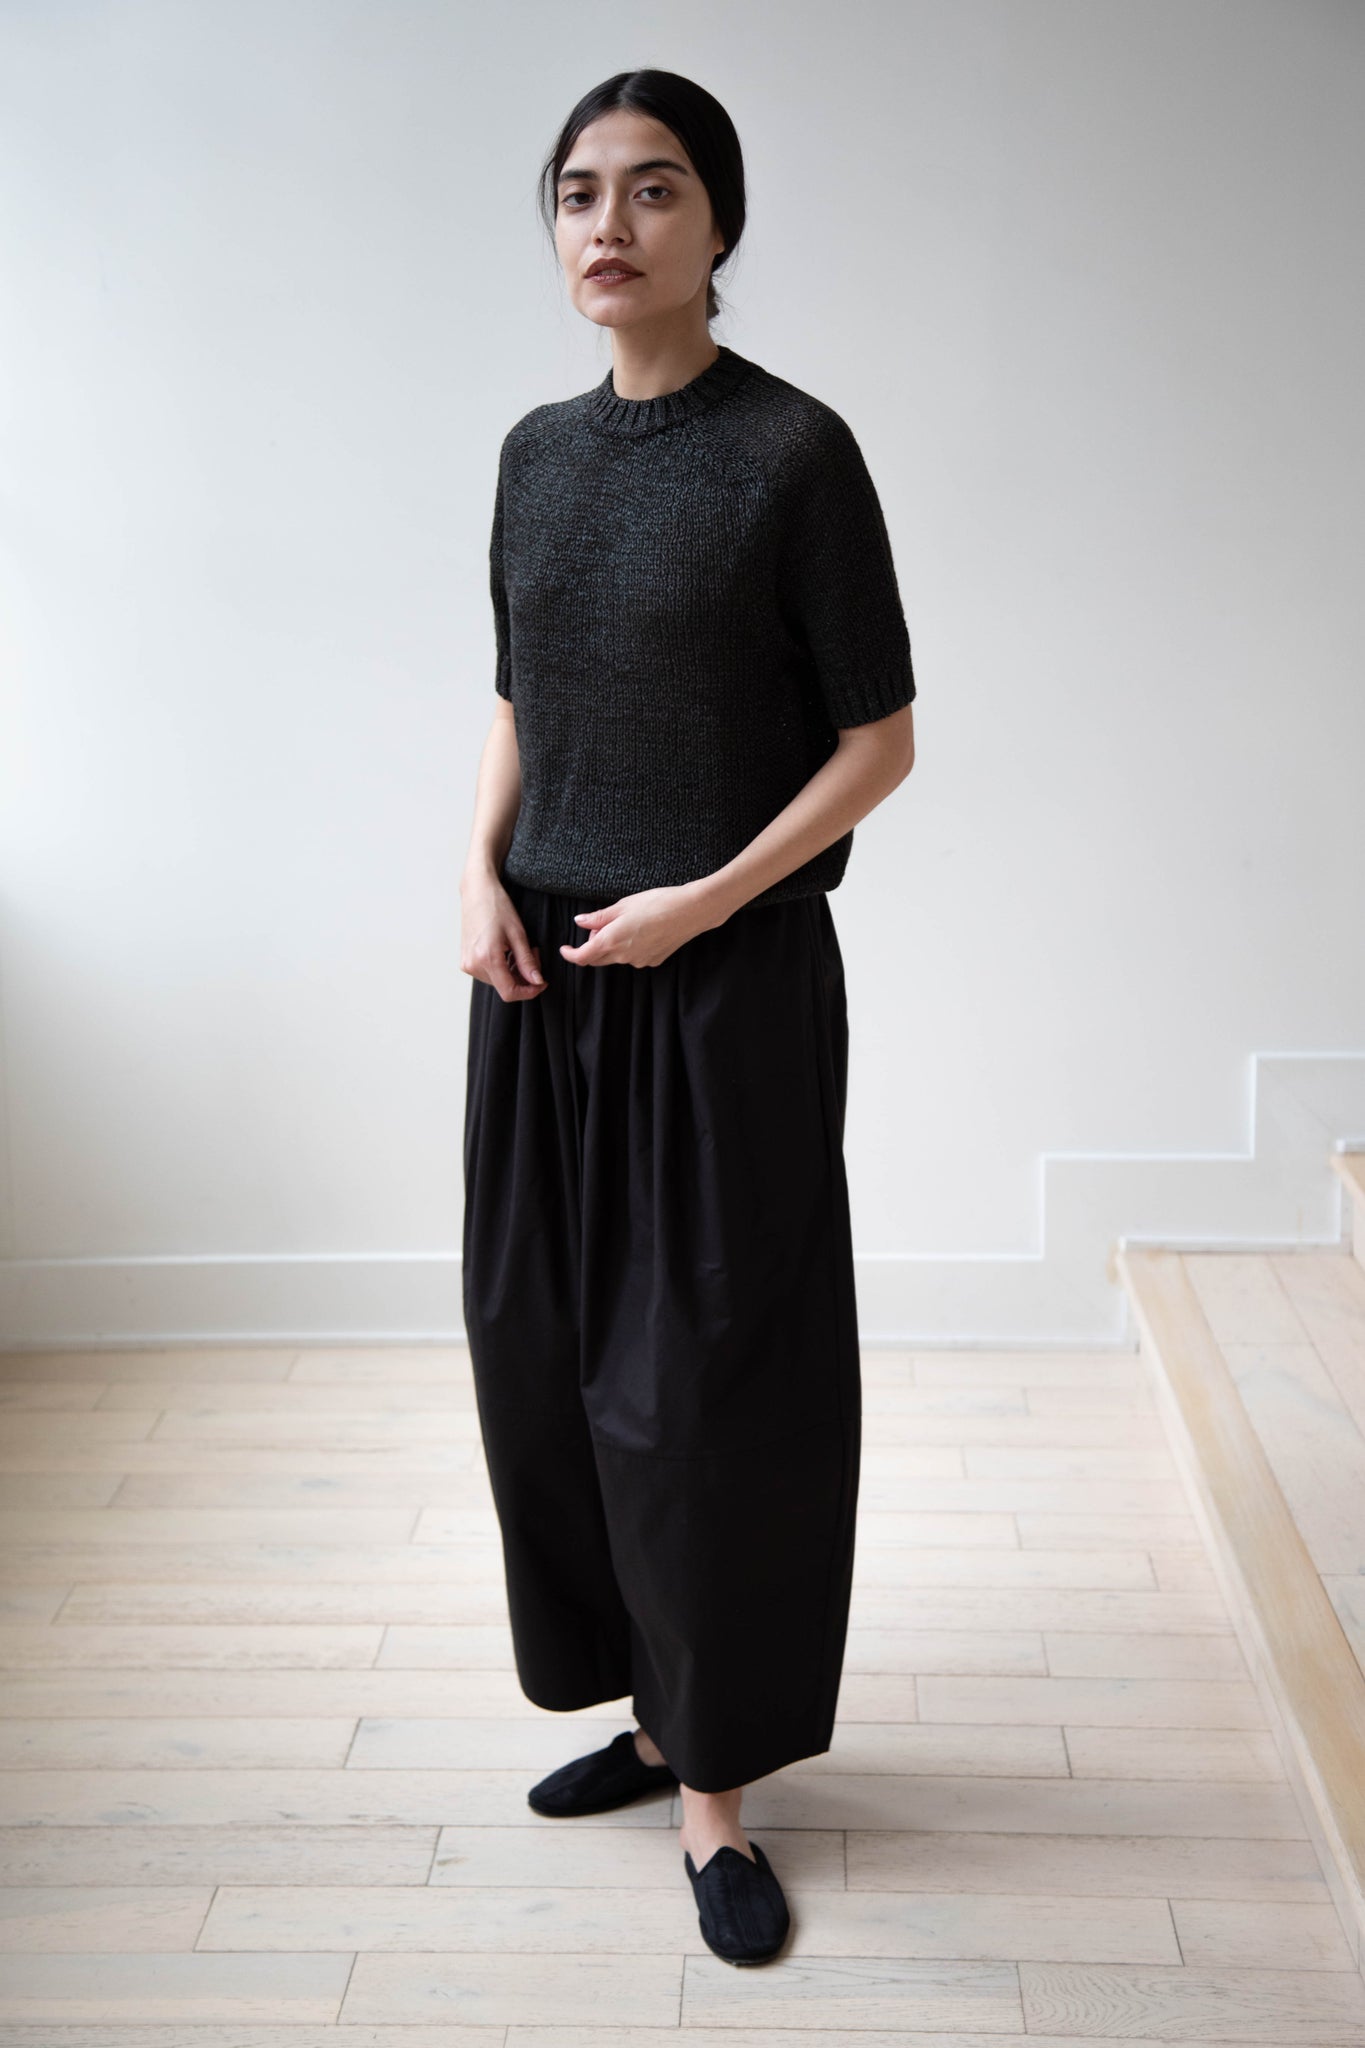 Nothing Written Bamboo Short Pullover in Charcoal